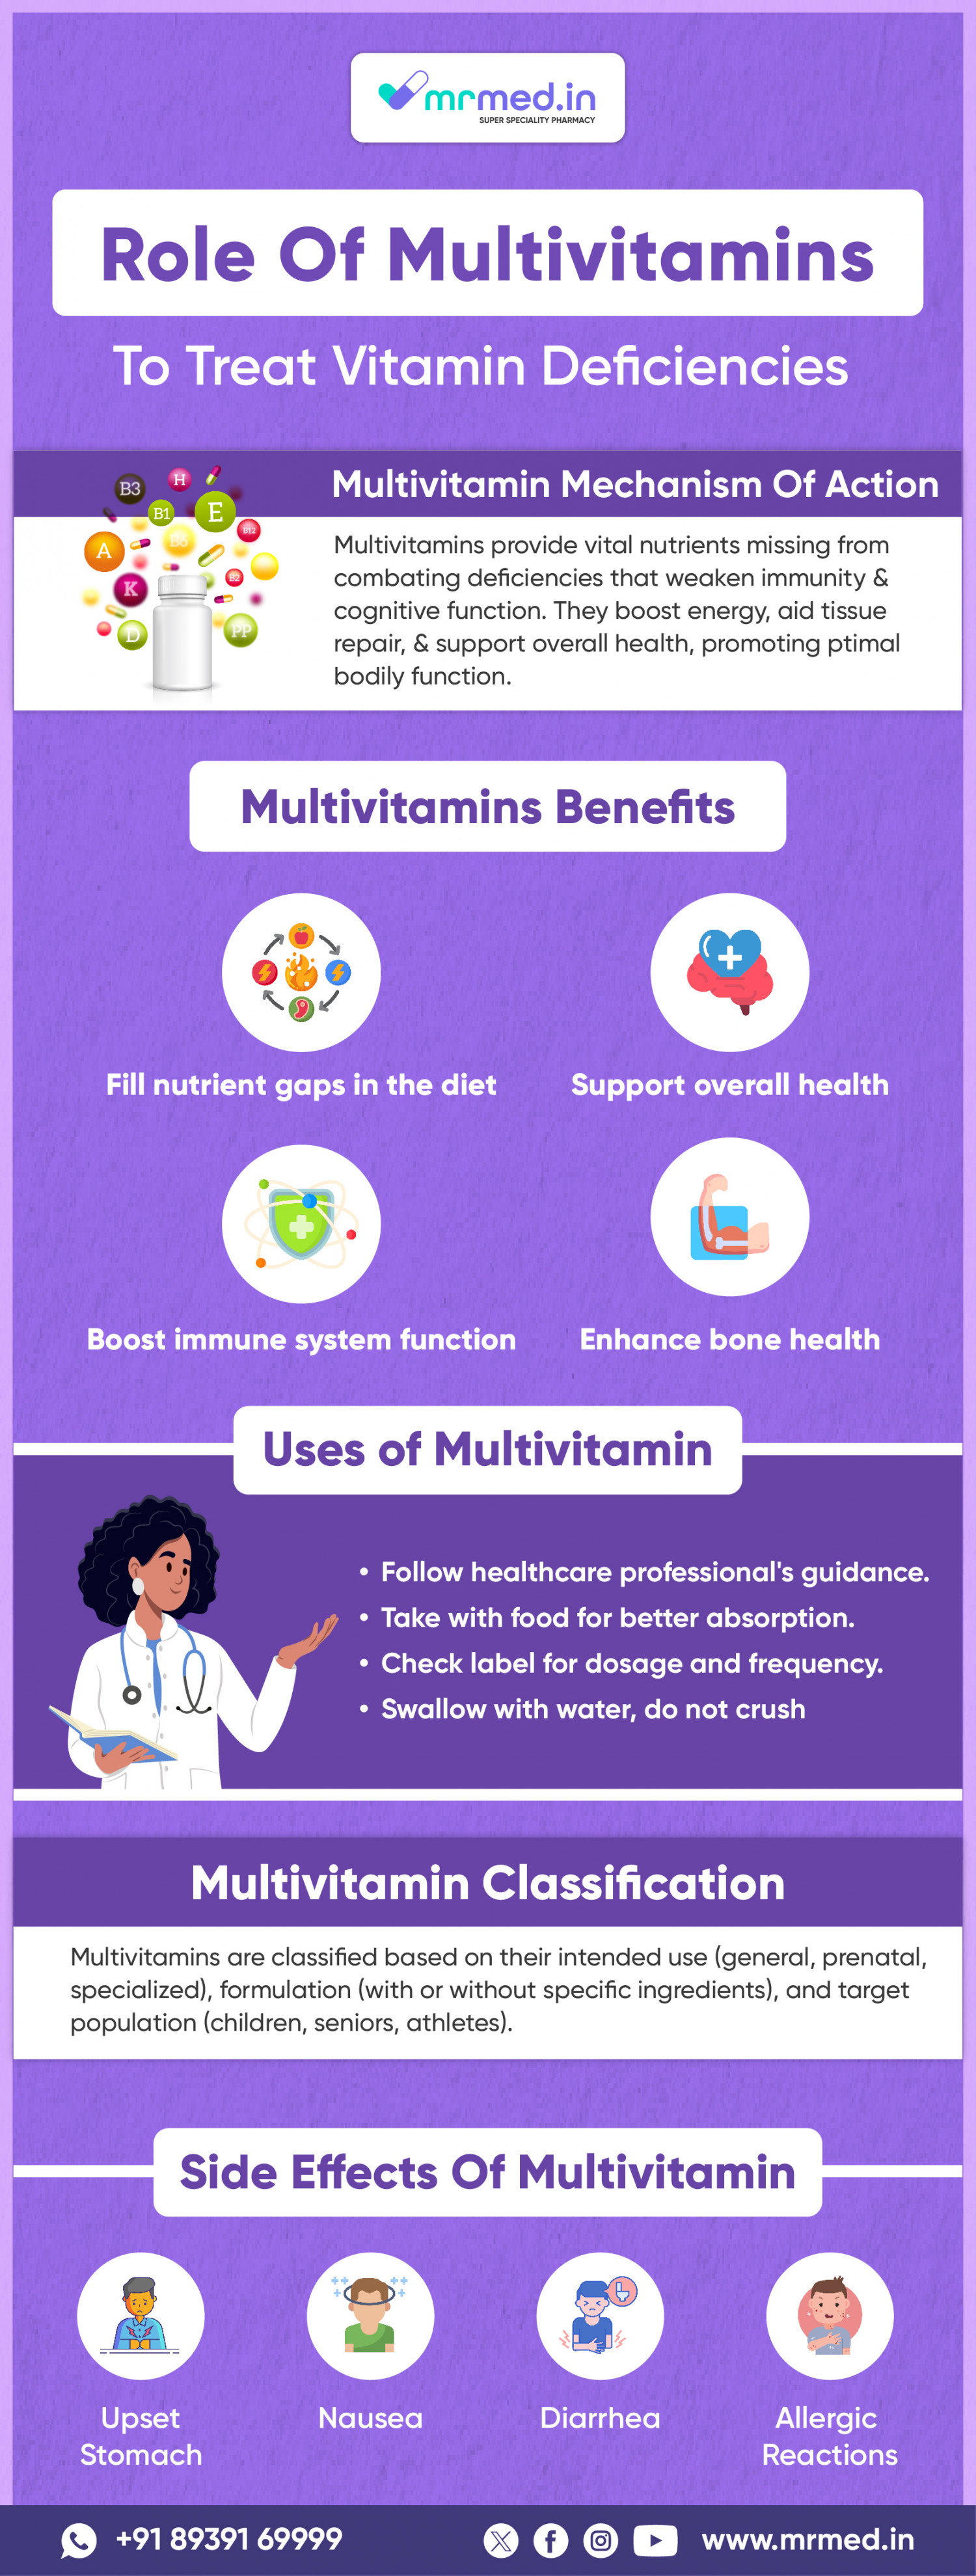 Role of Multivitamins to Treat Vitamin Deficiencies Infographic